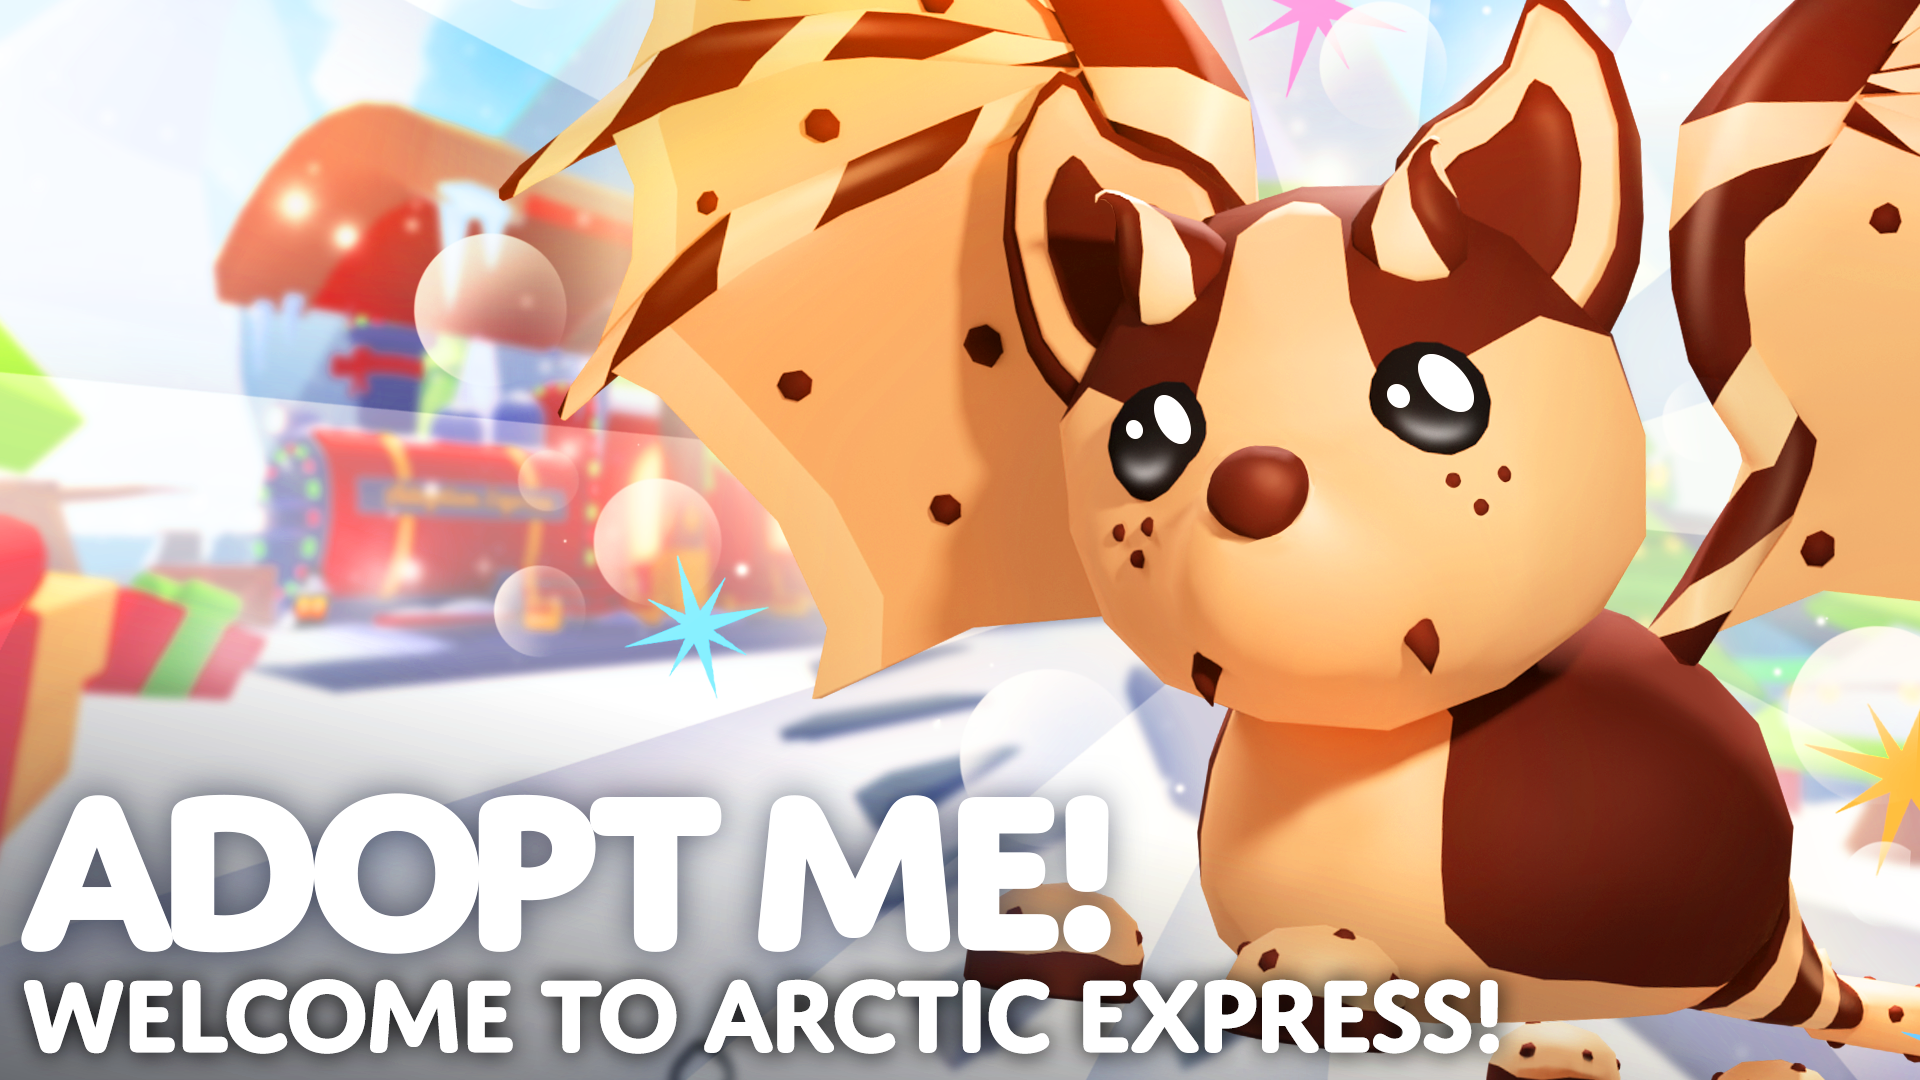 ️ Welcome to Arctic Express! ️ - Adopt Me!